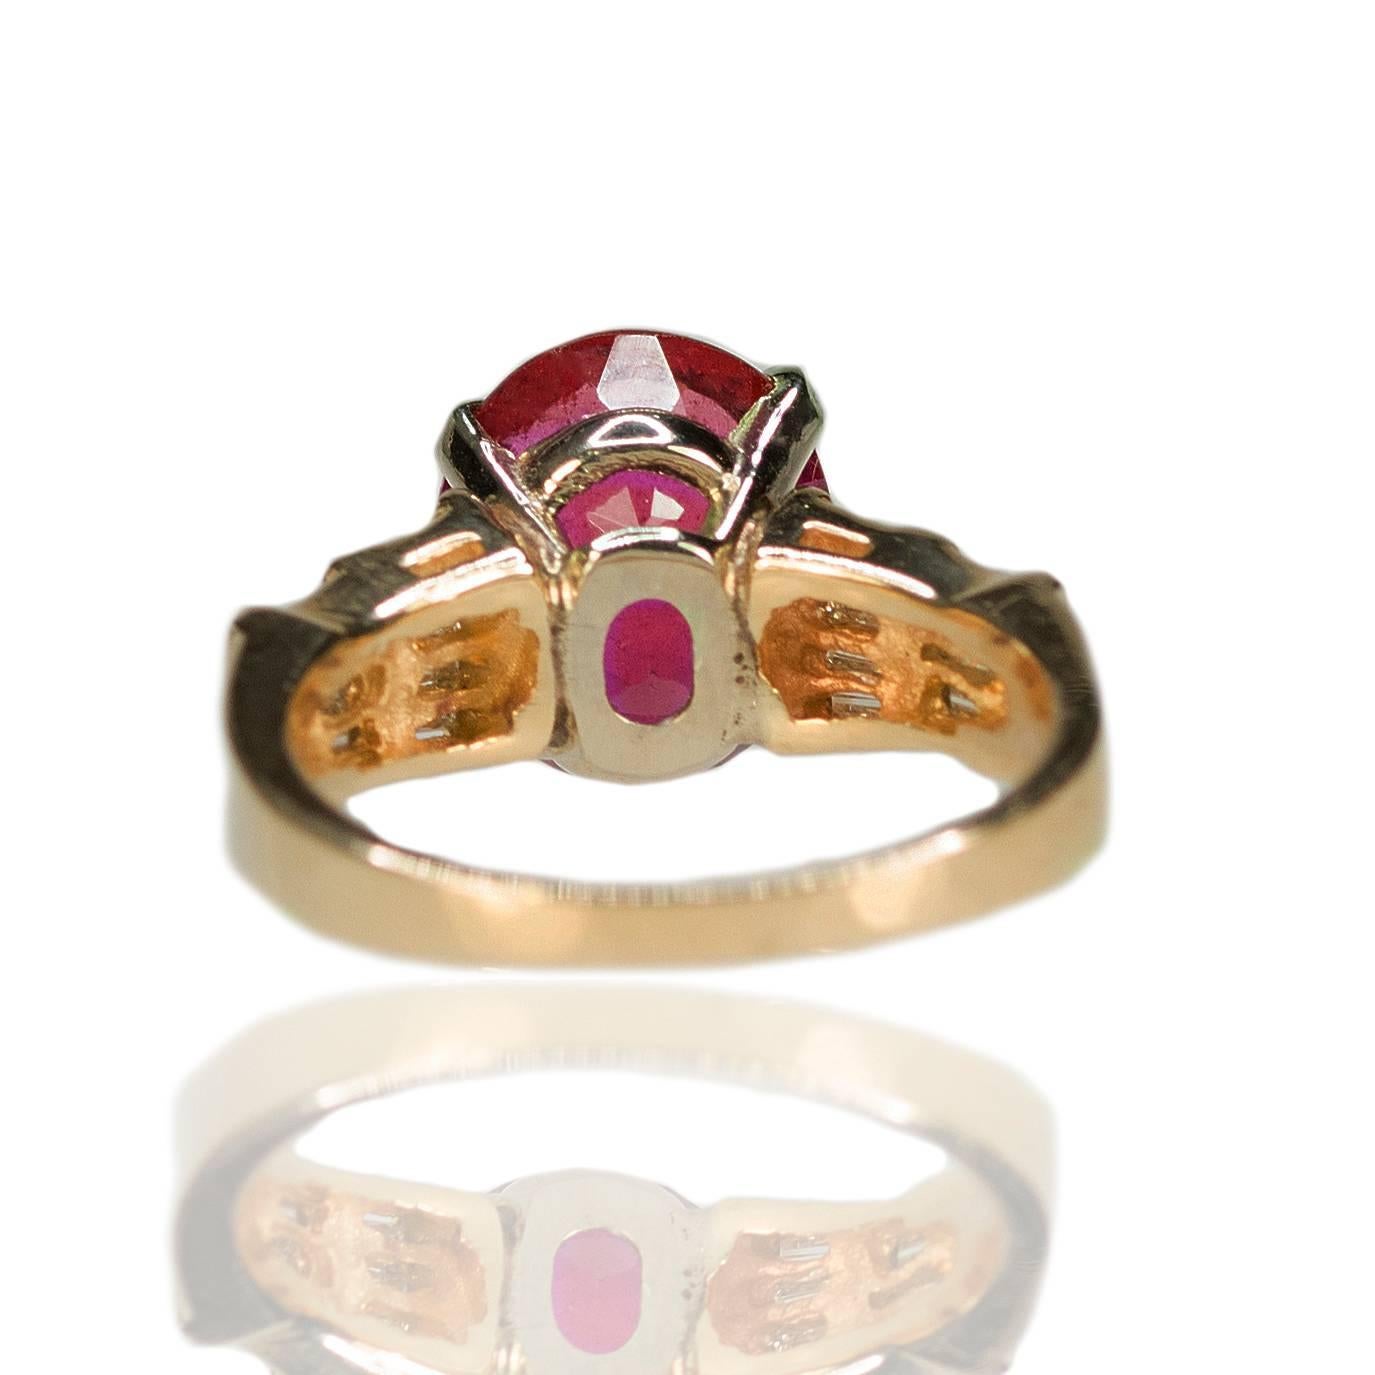 14k Ring set with one 5.13 carat Rubellite Tourmaline and approximately 0.50 carats of tapered baguette diamonds, 6.42g